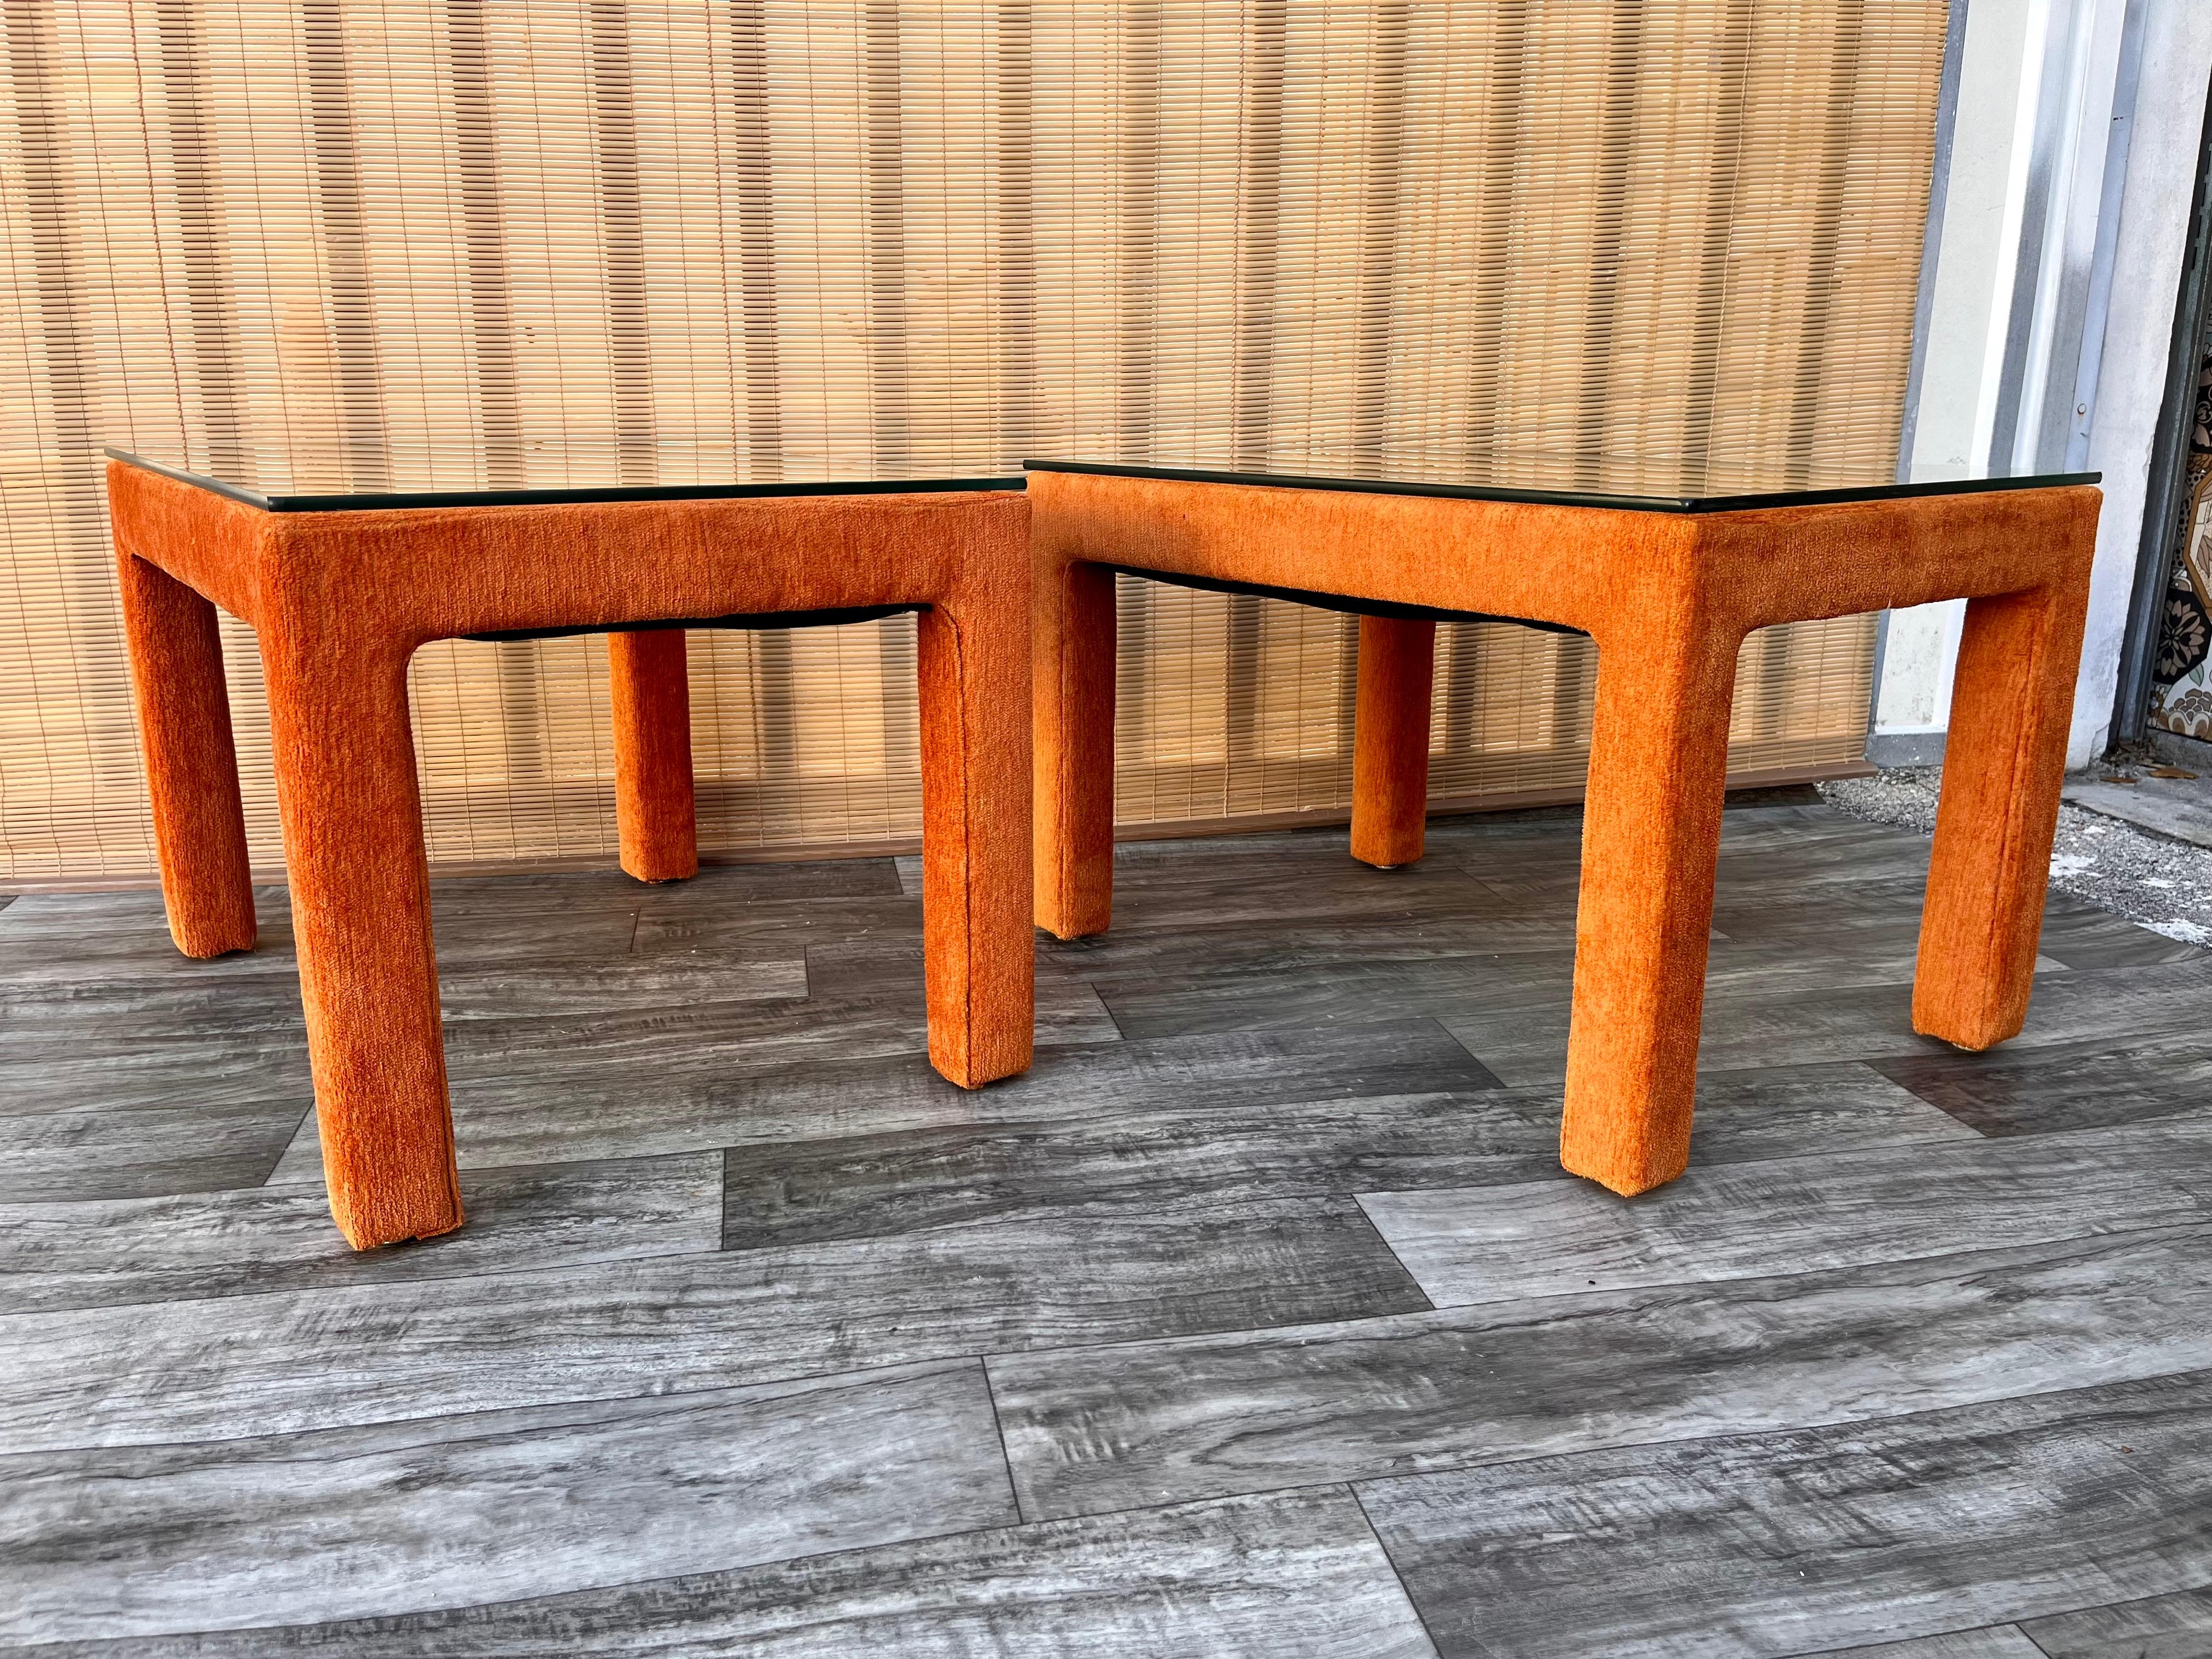 Upholstery Pair of Mid-Century Modern Fully Upholstered Side Tables, circa 1970s For Sale